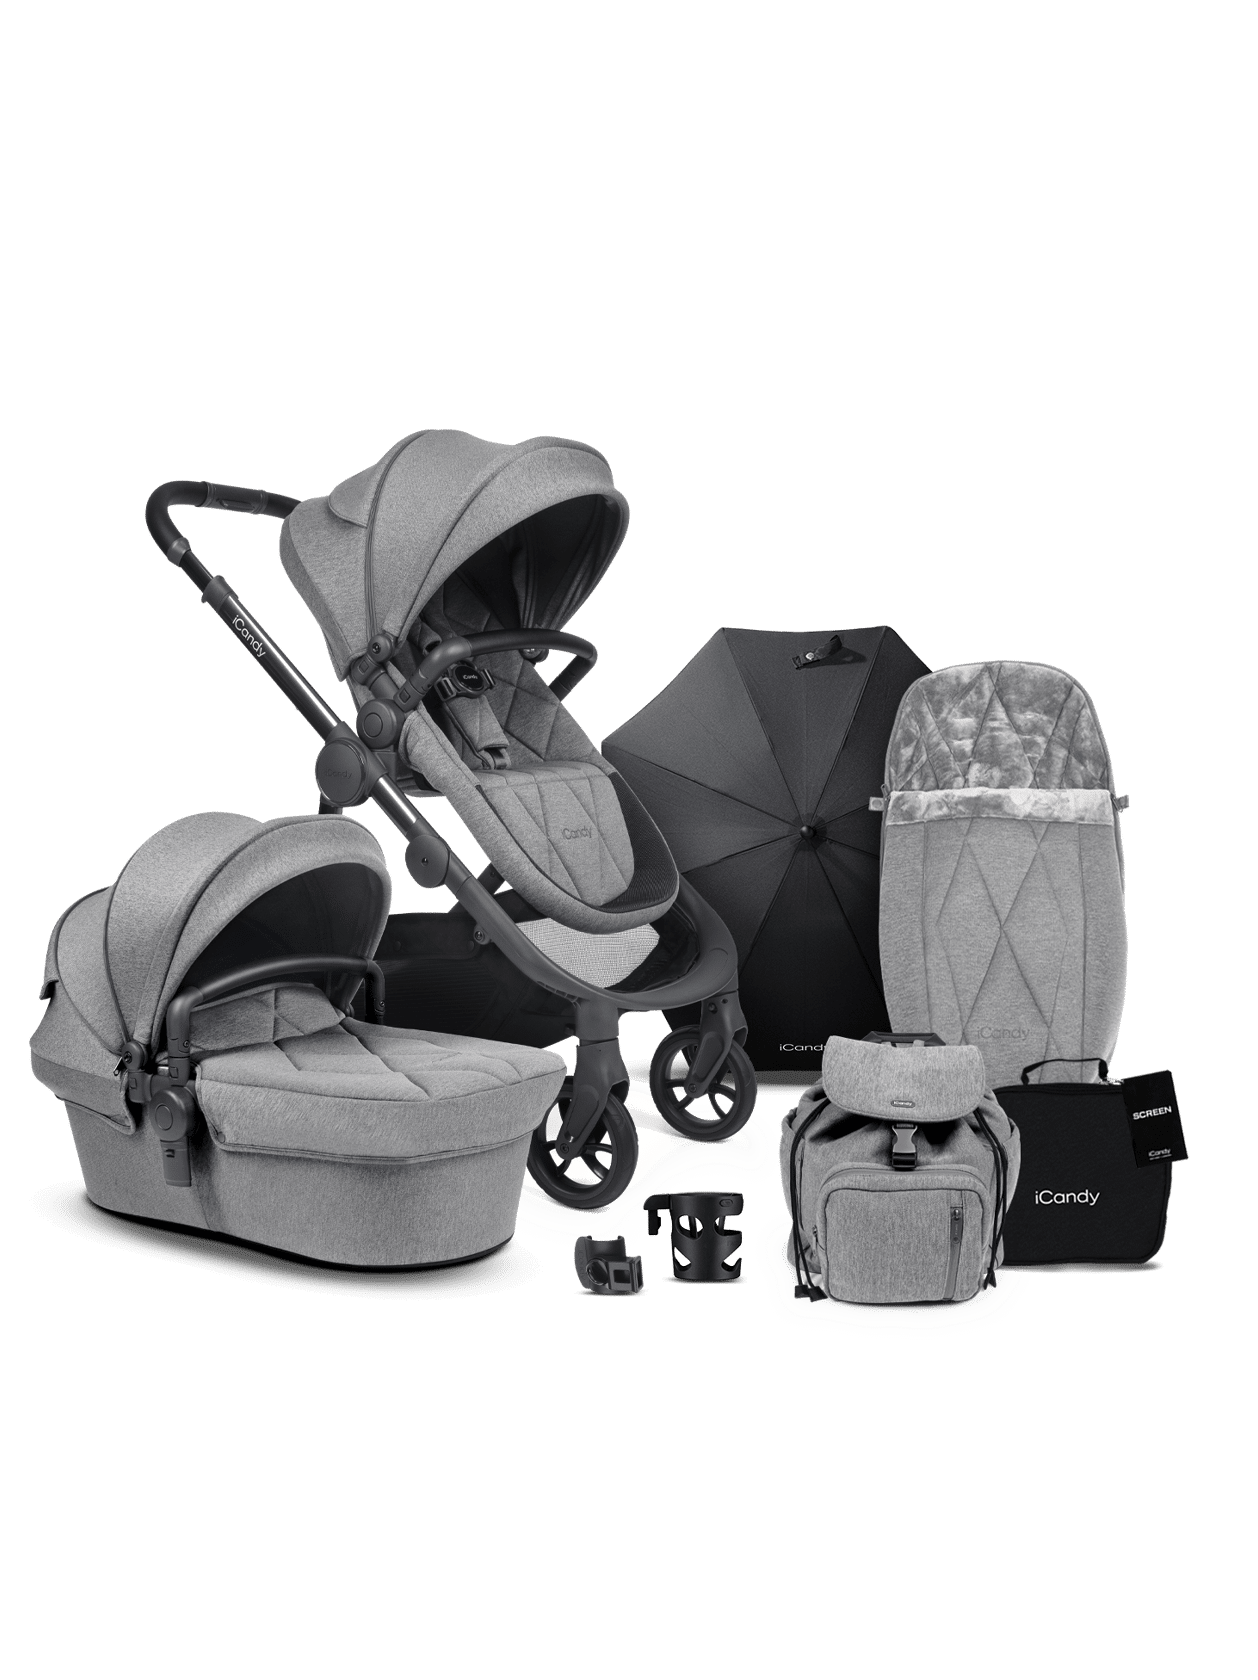 Orange Pushchair and Carrycot - Complete Bundle